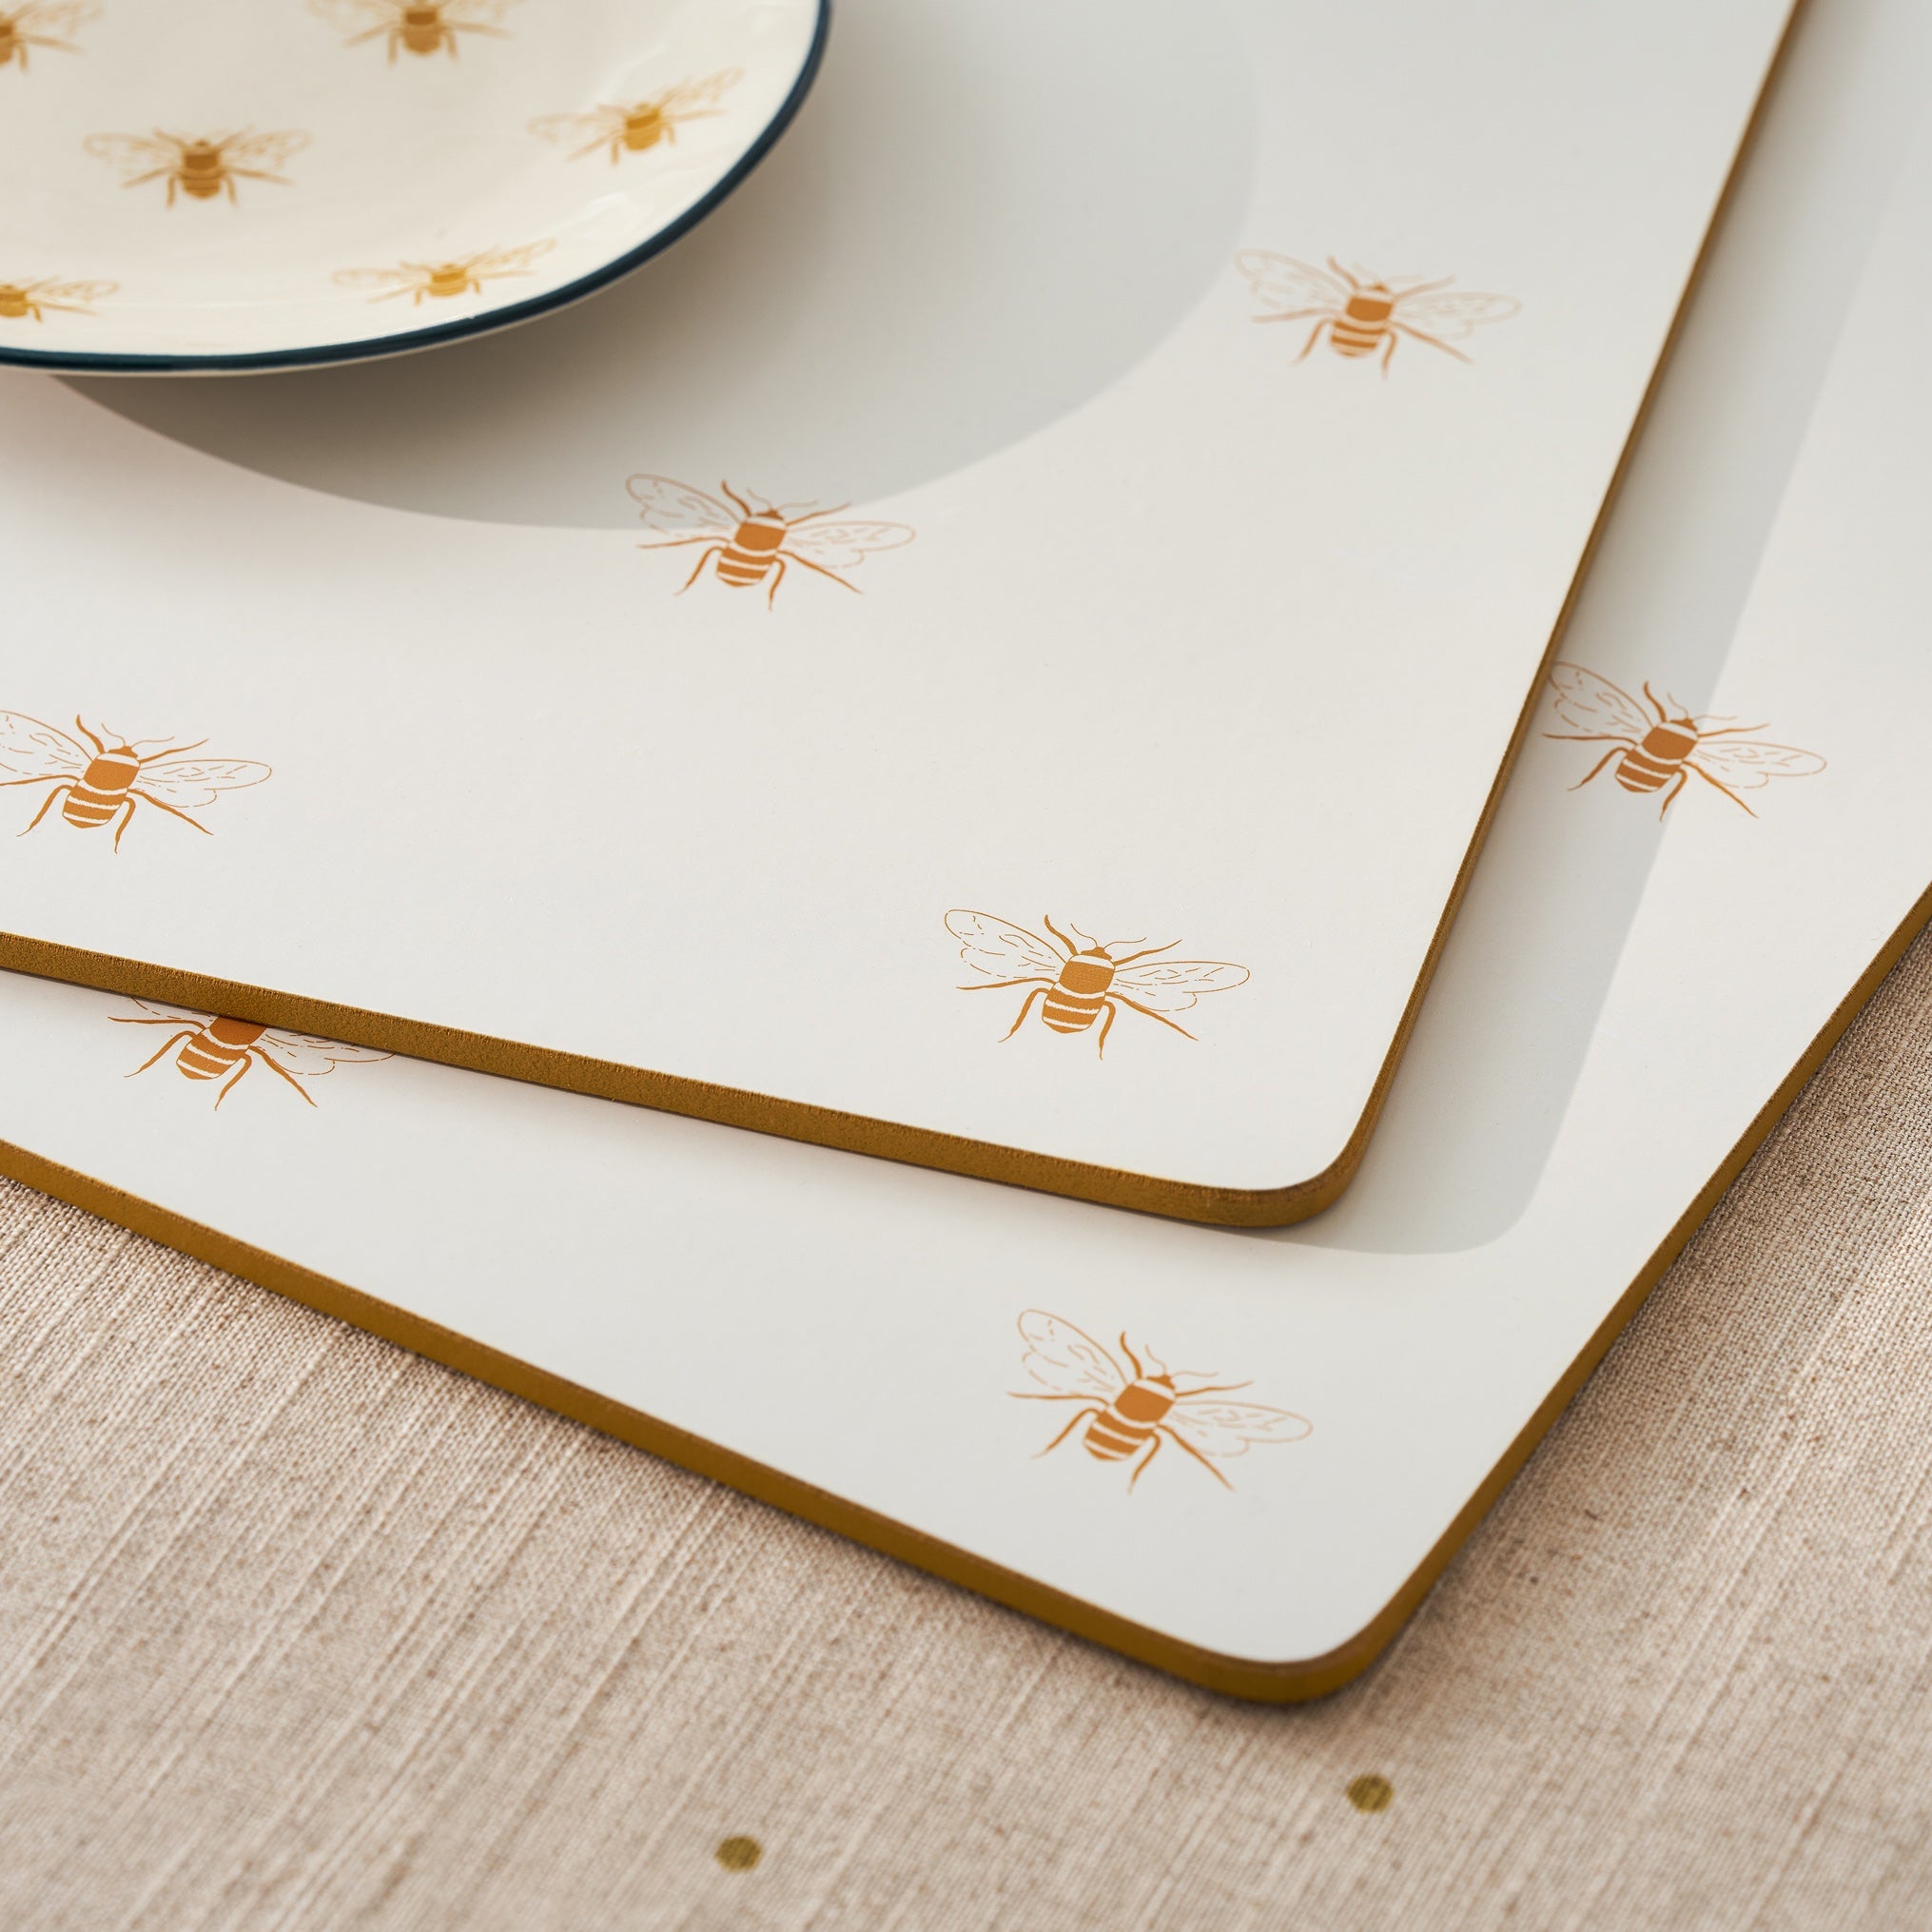 Bees Extra Large Placemats (Set of 2)